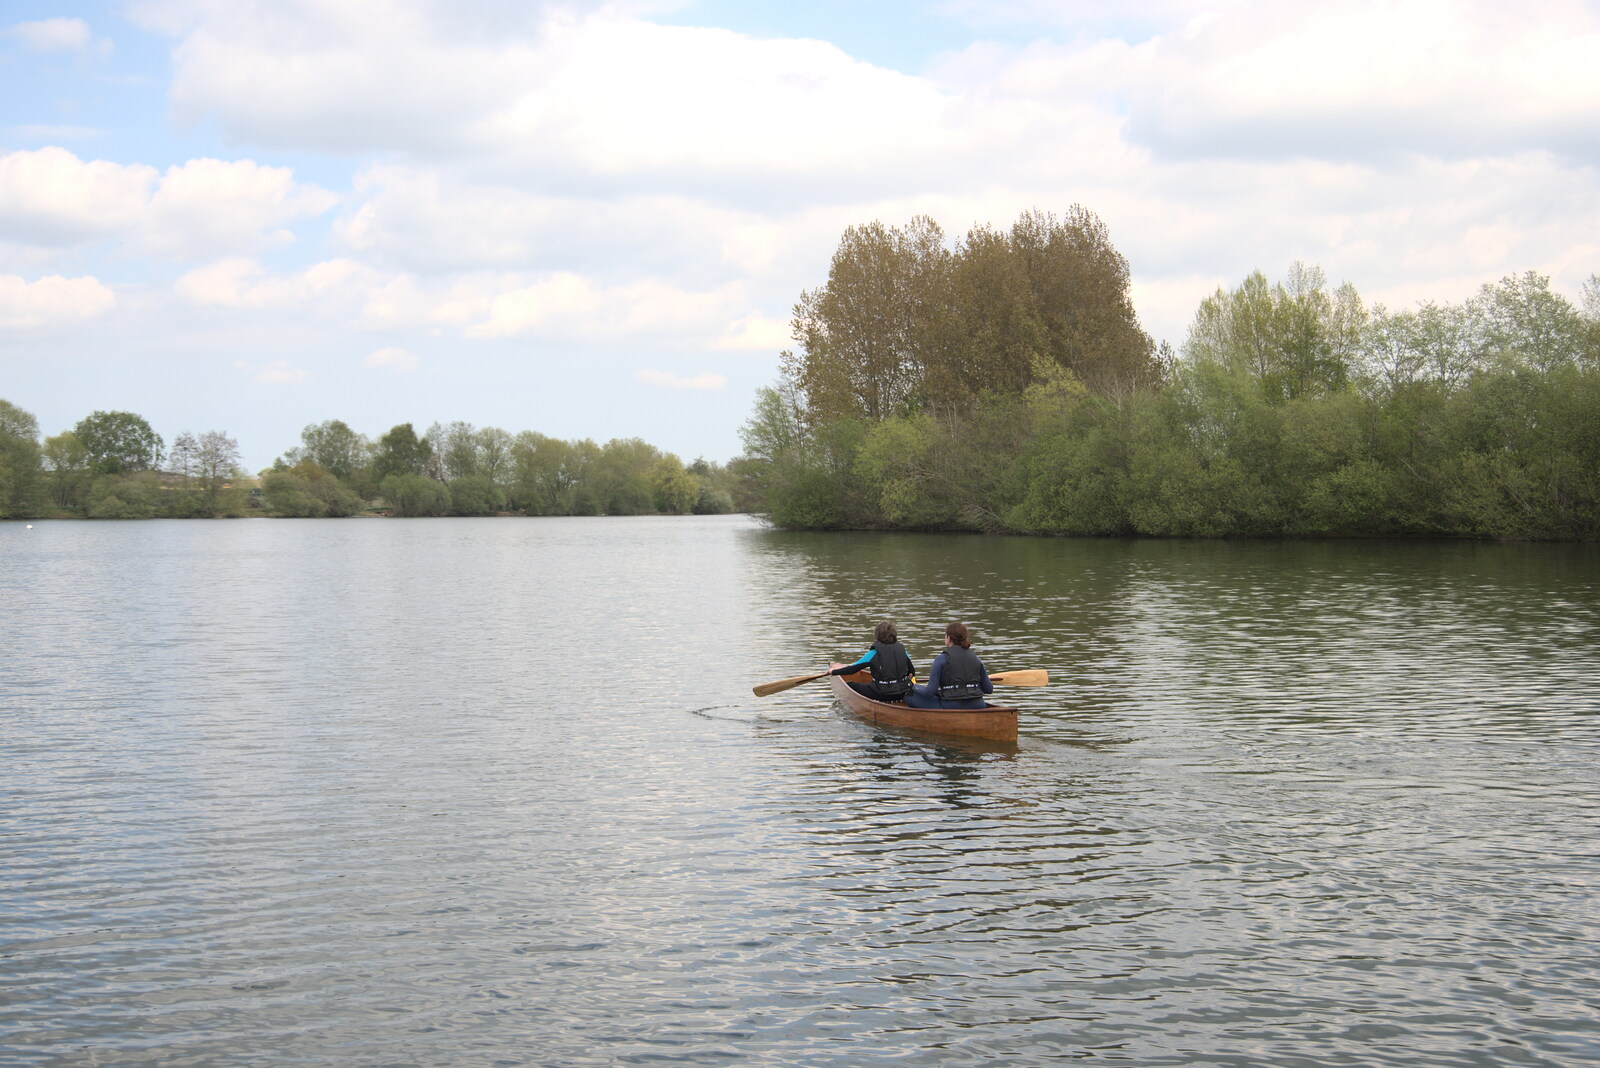 The Canoe's First Outing, Weybread Lake, Harleston - 1st May 2022: Fred and Isobel head out onto the lake